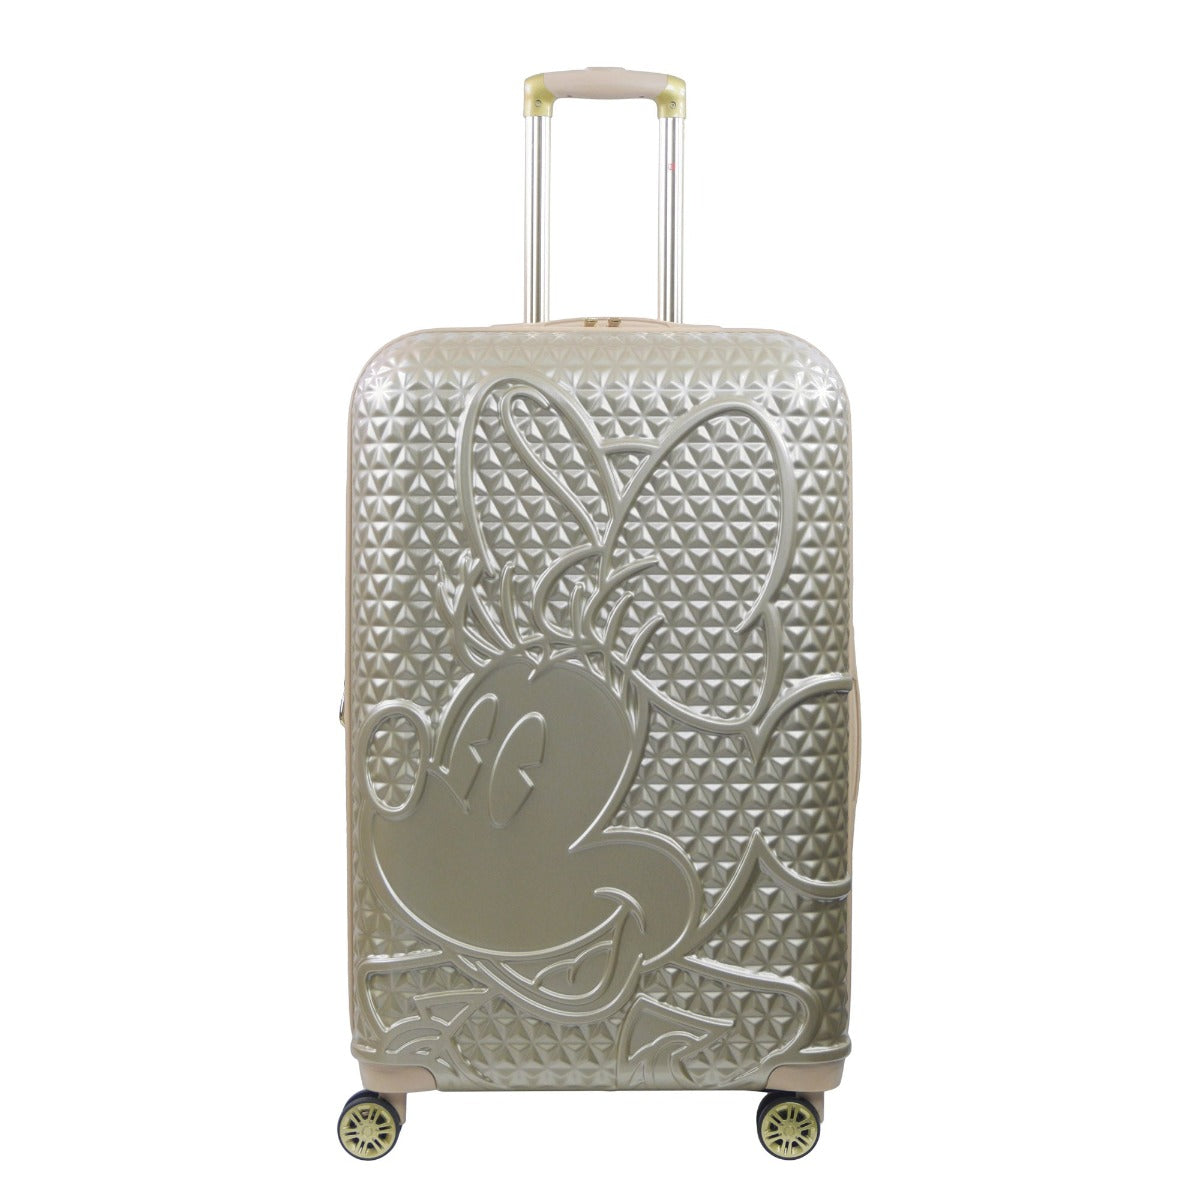 Taupe Ful Disney Minnie Mouse 30" spinner hardside suitcase - best check-in luggage for travel